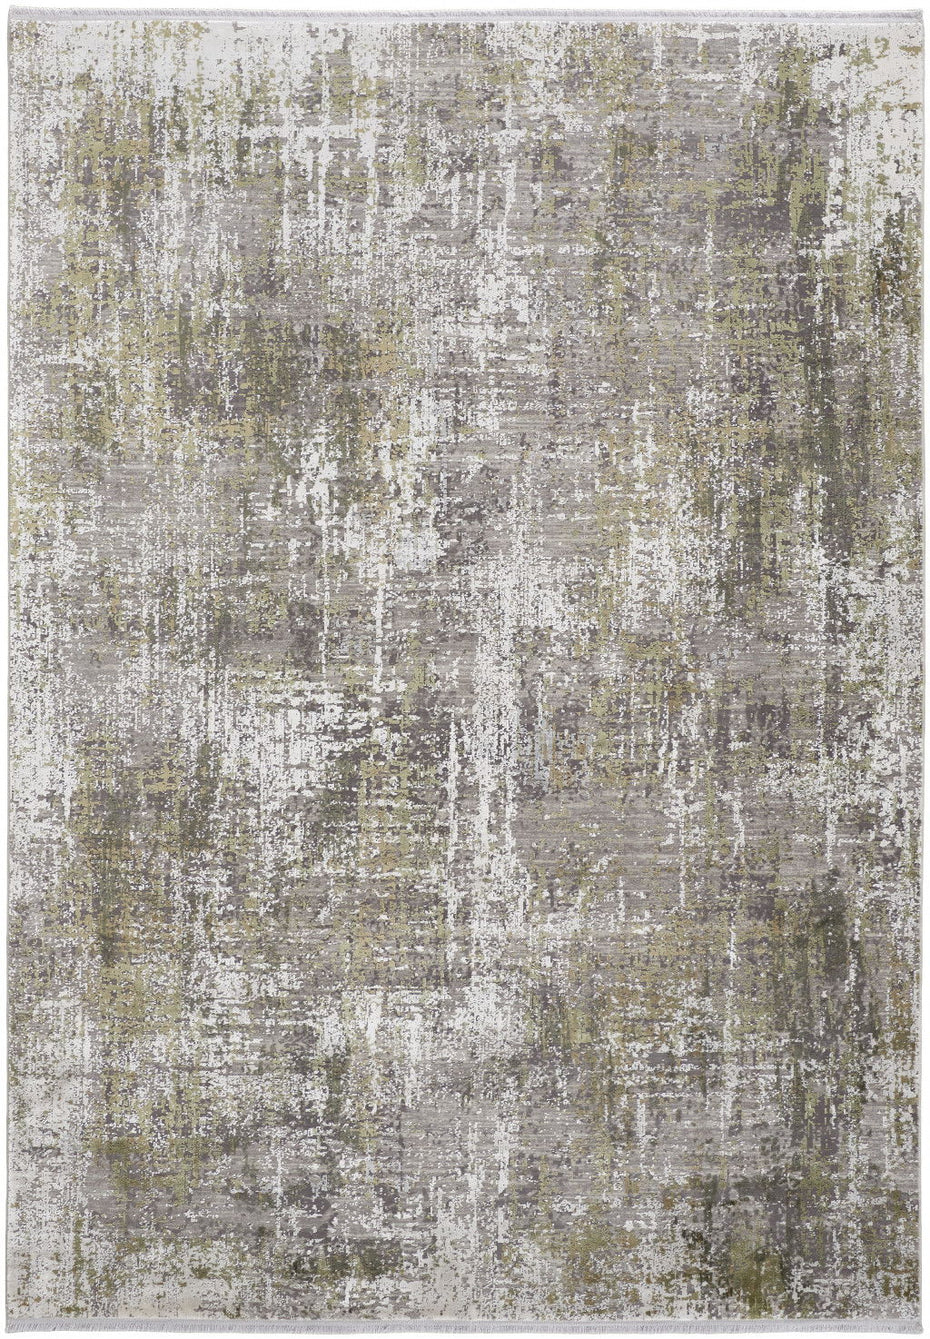 Abstract Power Loom Distressed Area Rug - Green Gray And Ivory